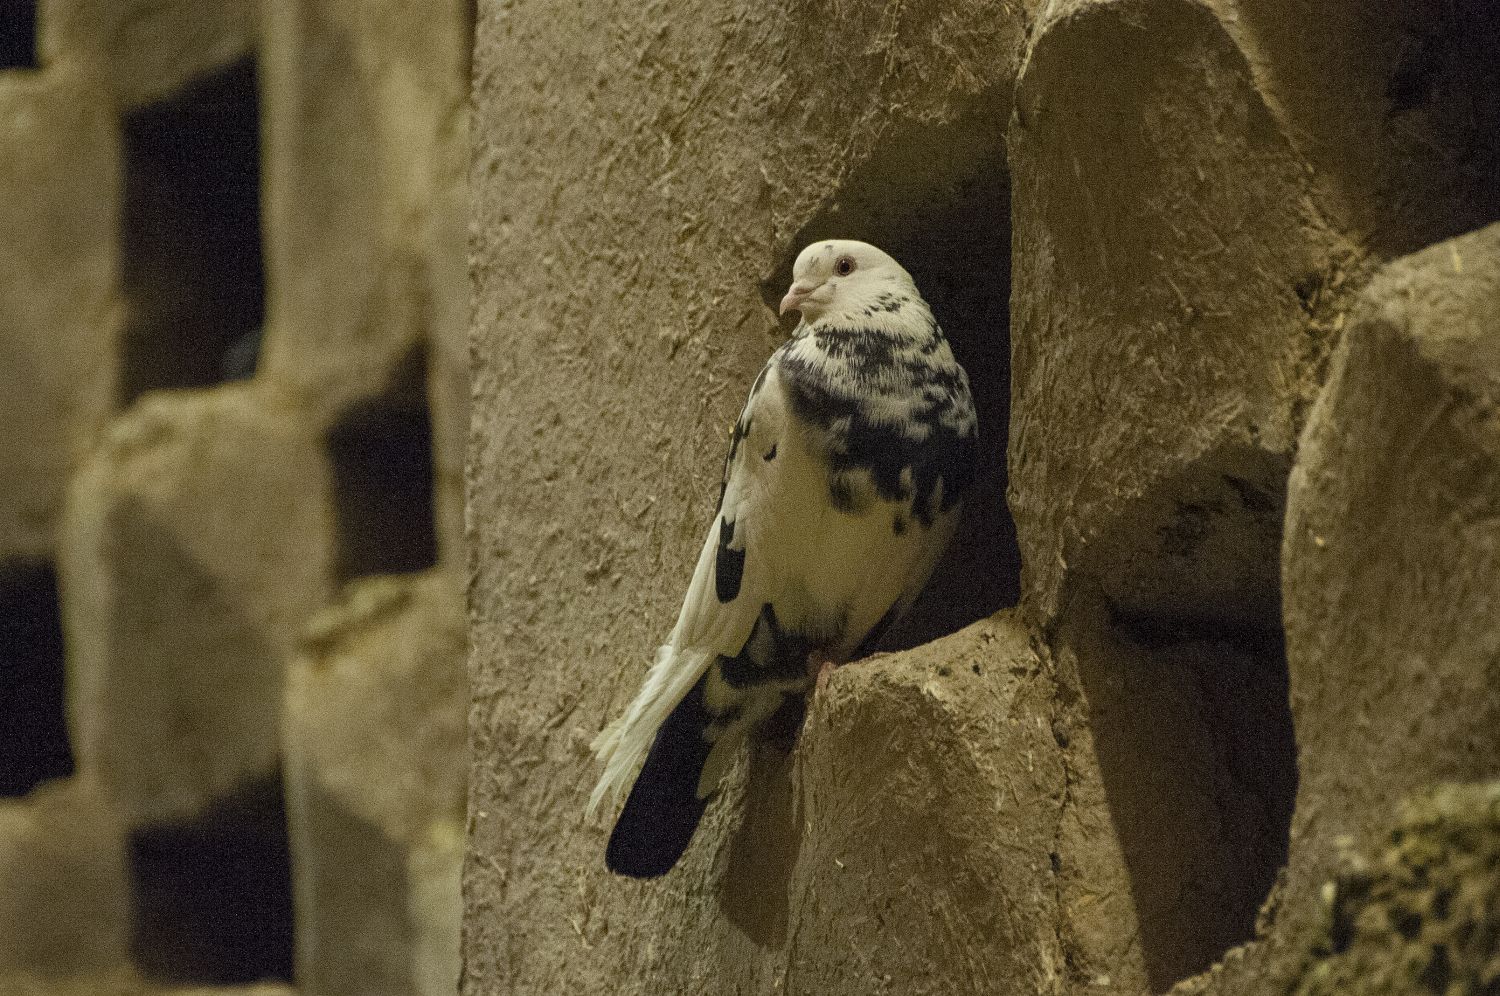 Interior view showing a pigeon roosting on a ledge at a pigeon tower (kabutarkhanah) in Mardavij Neighborhood of Isfahan.